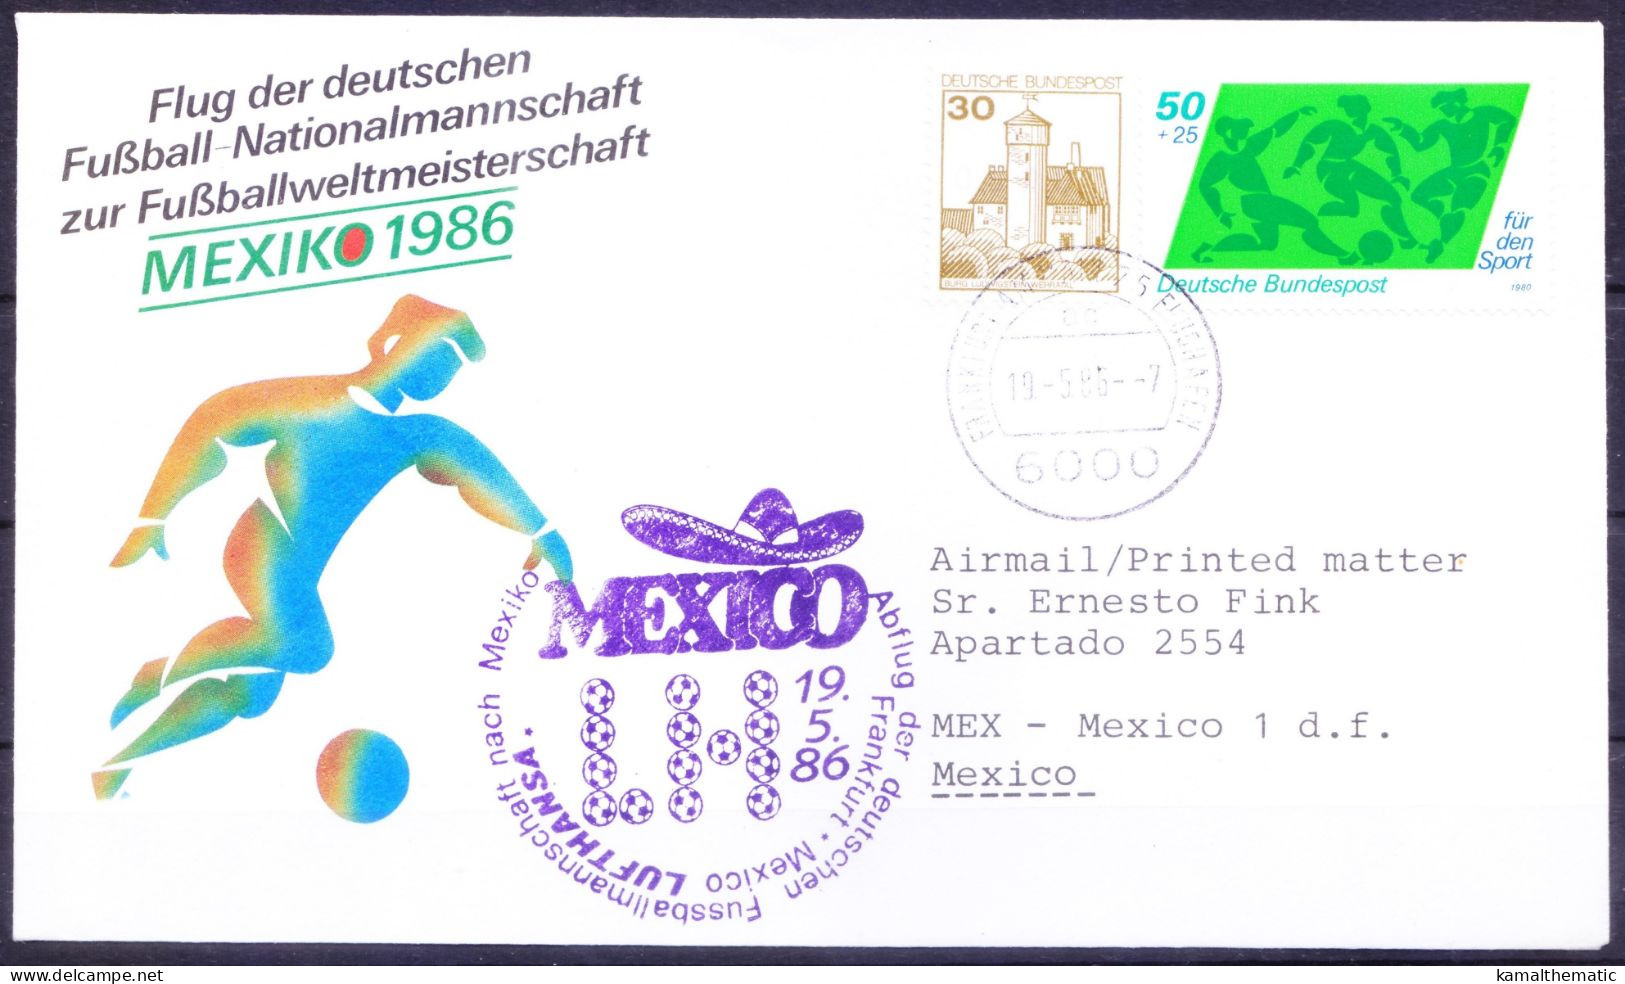 Germany 1986 Used Cover, Flight Of German Football Team To Mexico WC - 1986 – México